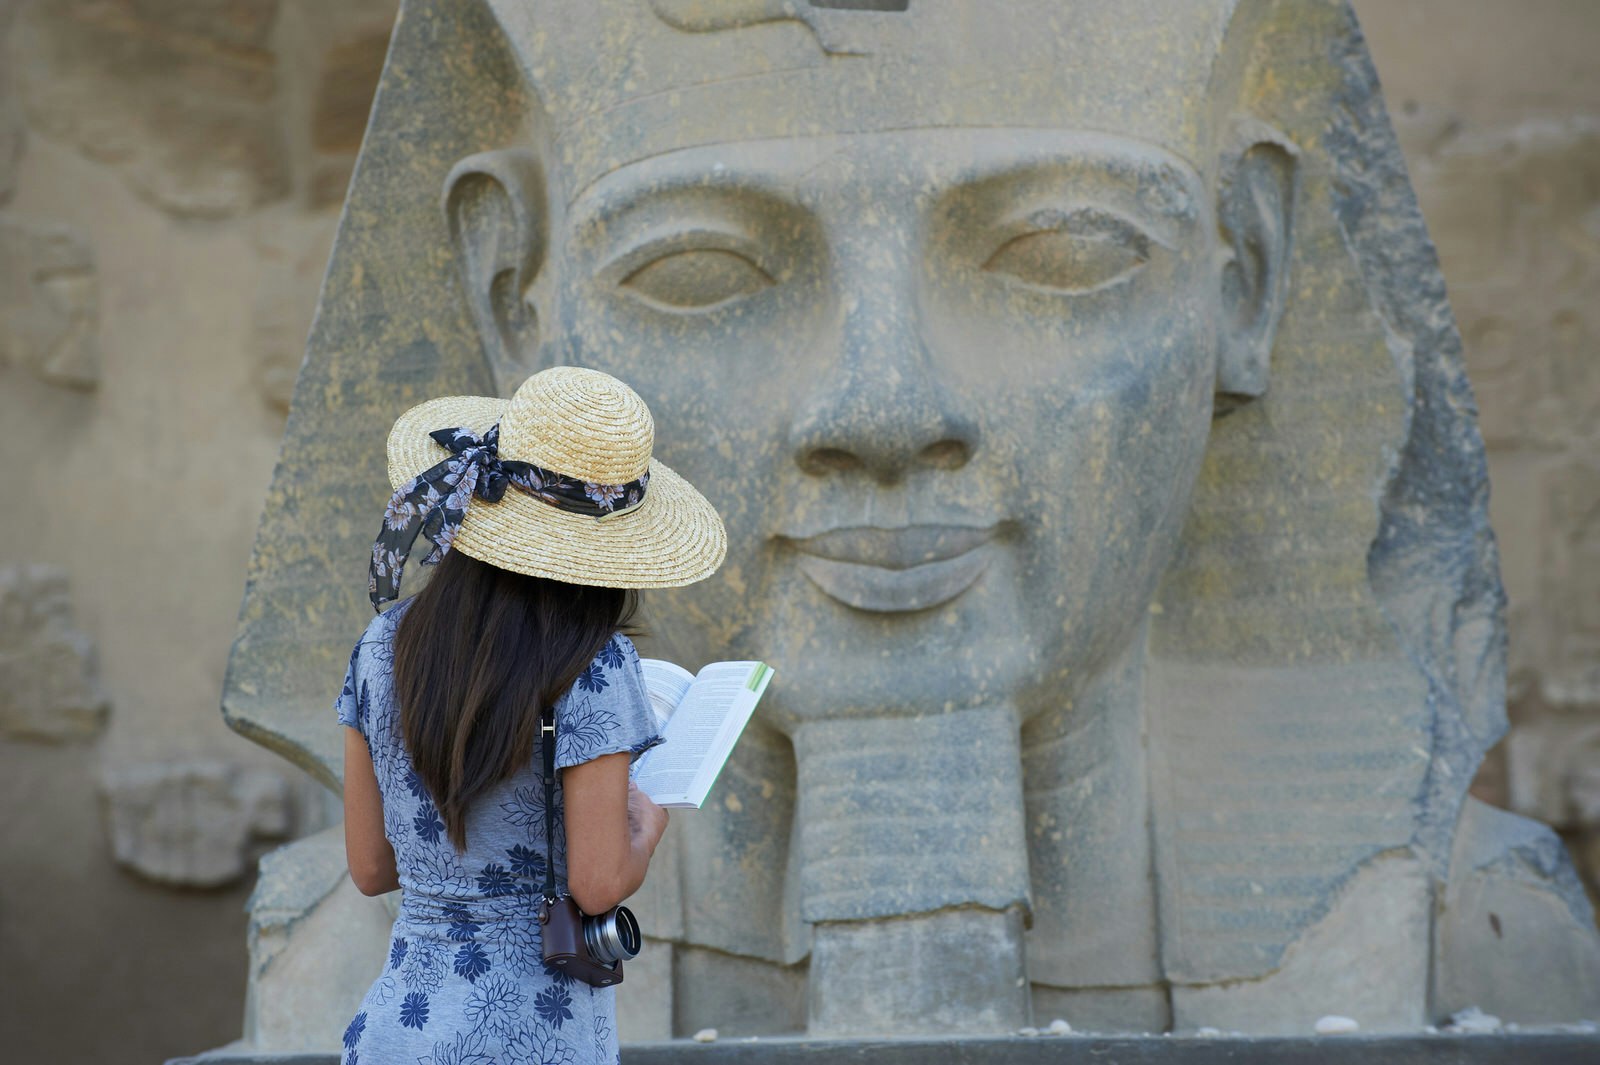 Tourist reads a guidebook and studies a statue of the pharaoh Ramses II, Temple of Luxor, Egypt